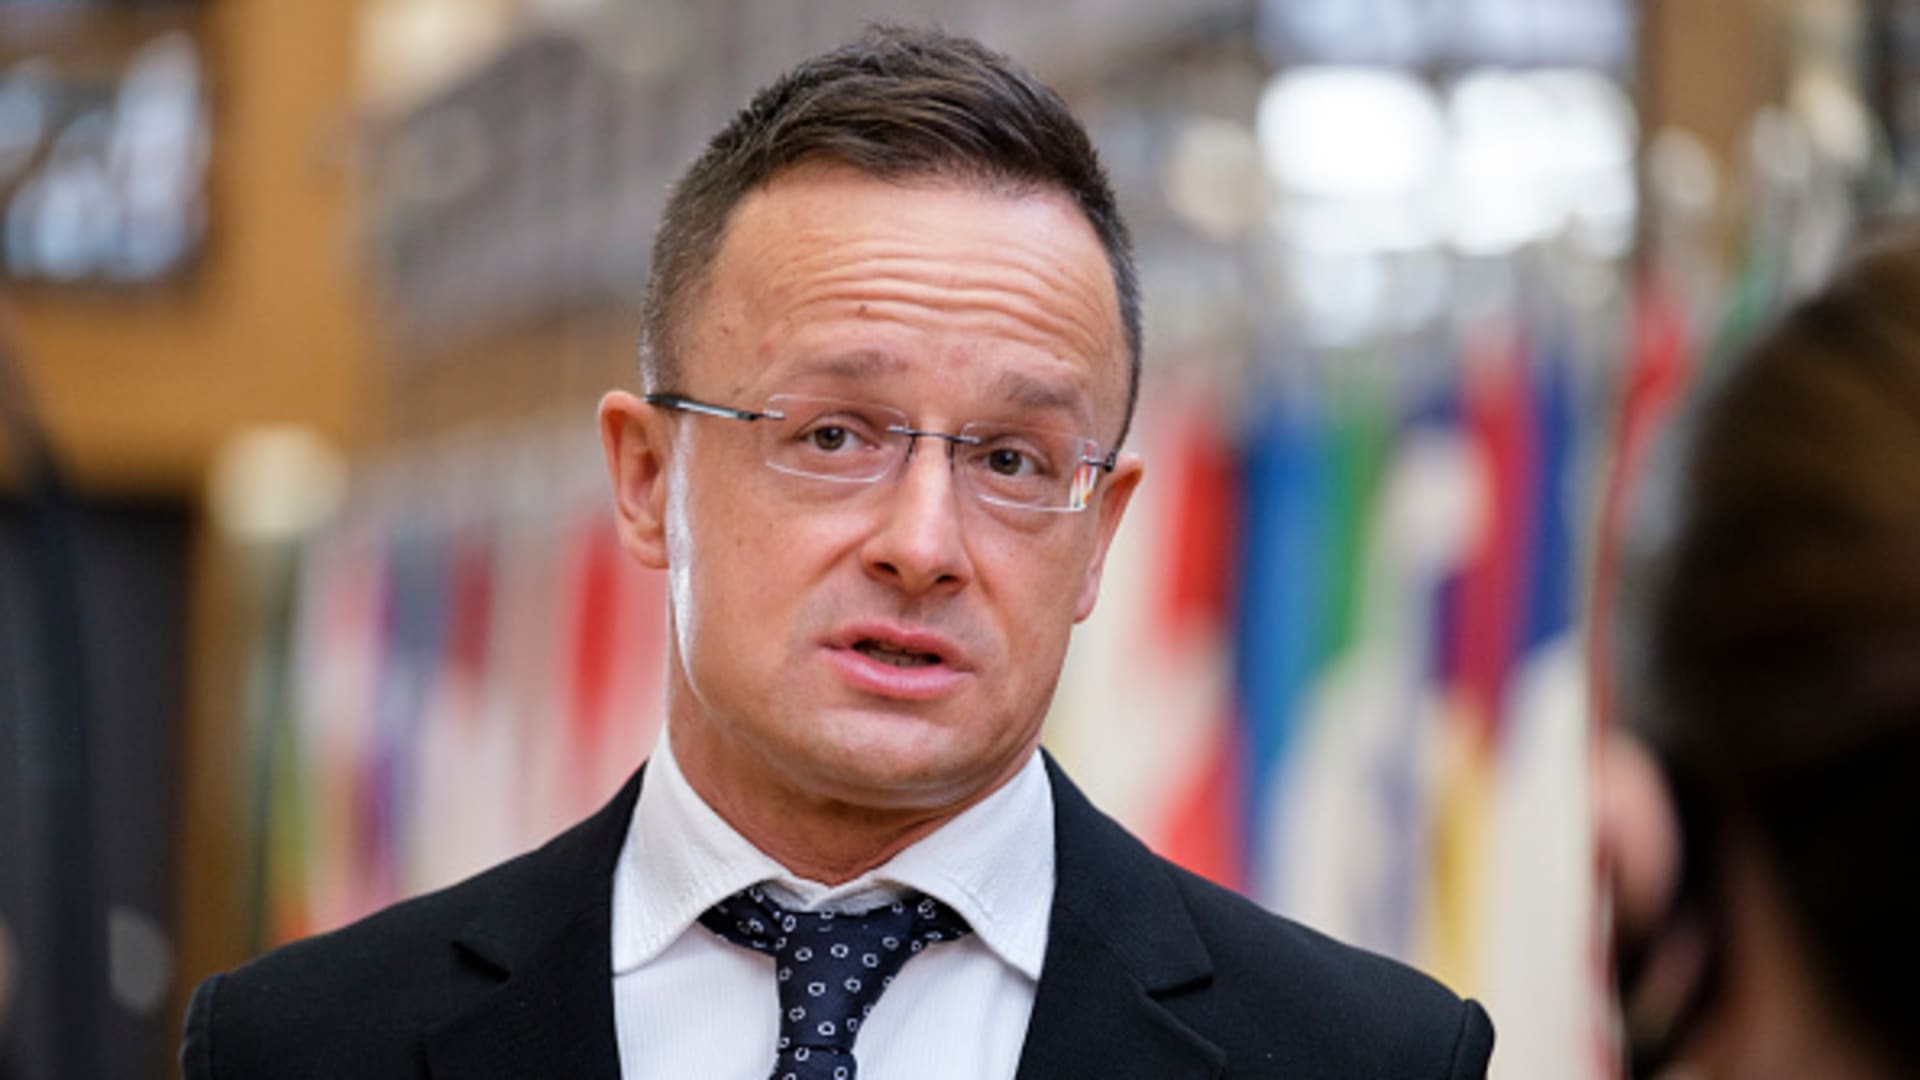 The EU should have ‘isolated’ the Ukraine struggle, Hungarian foreign minister says